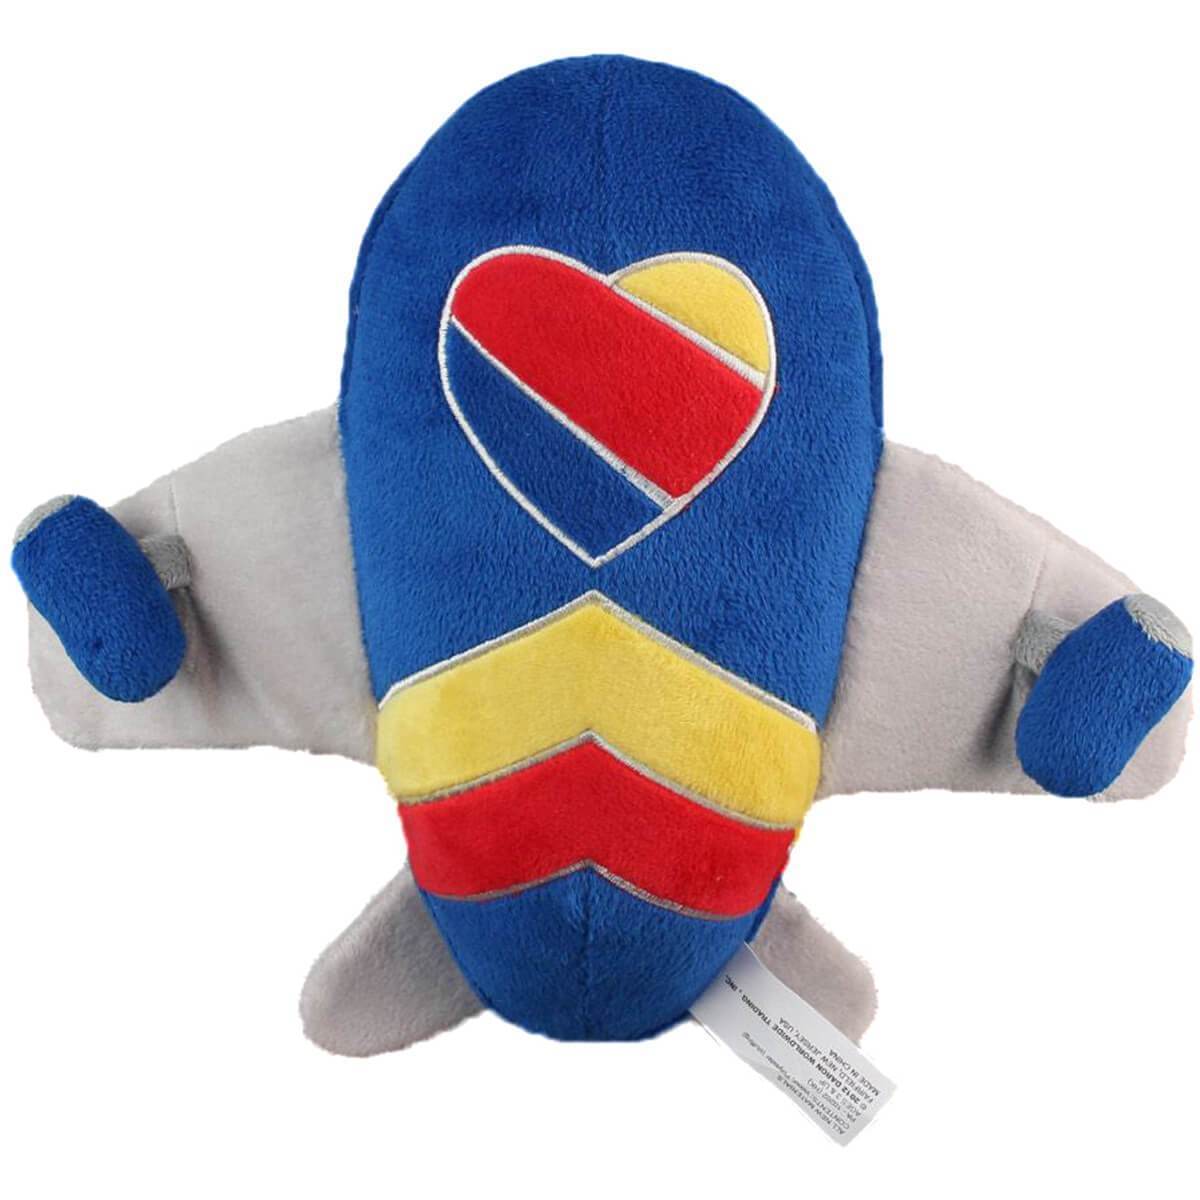 Southwest Airlines Plush Airplane Toy - PilotMall.com